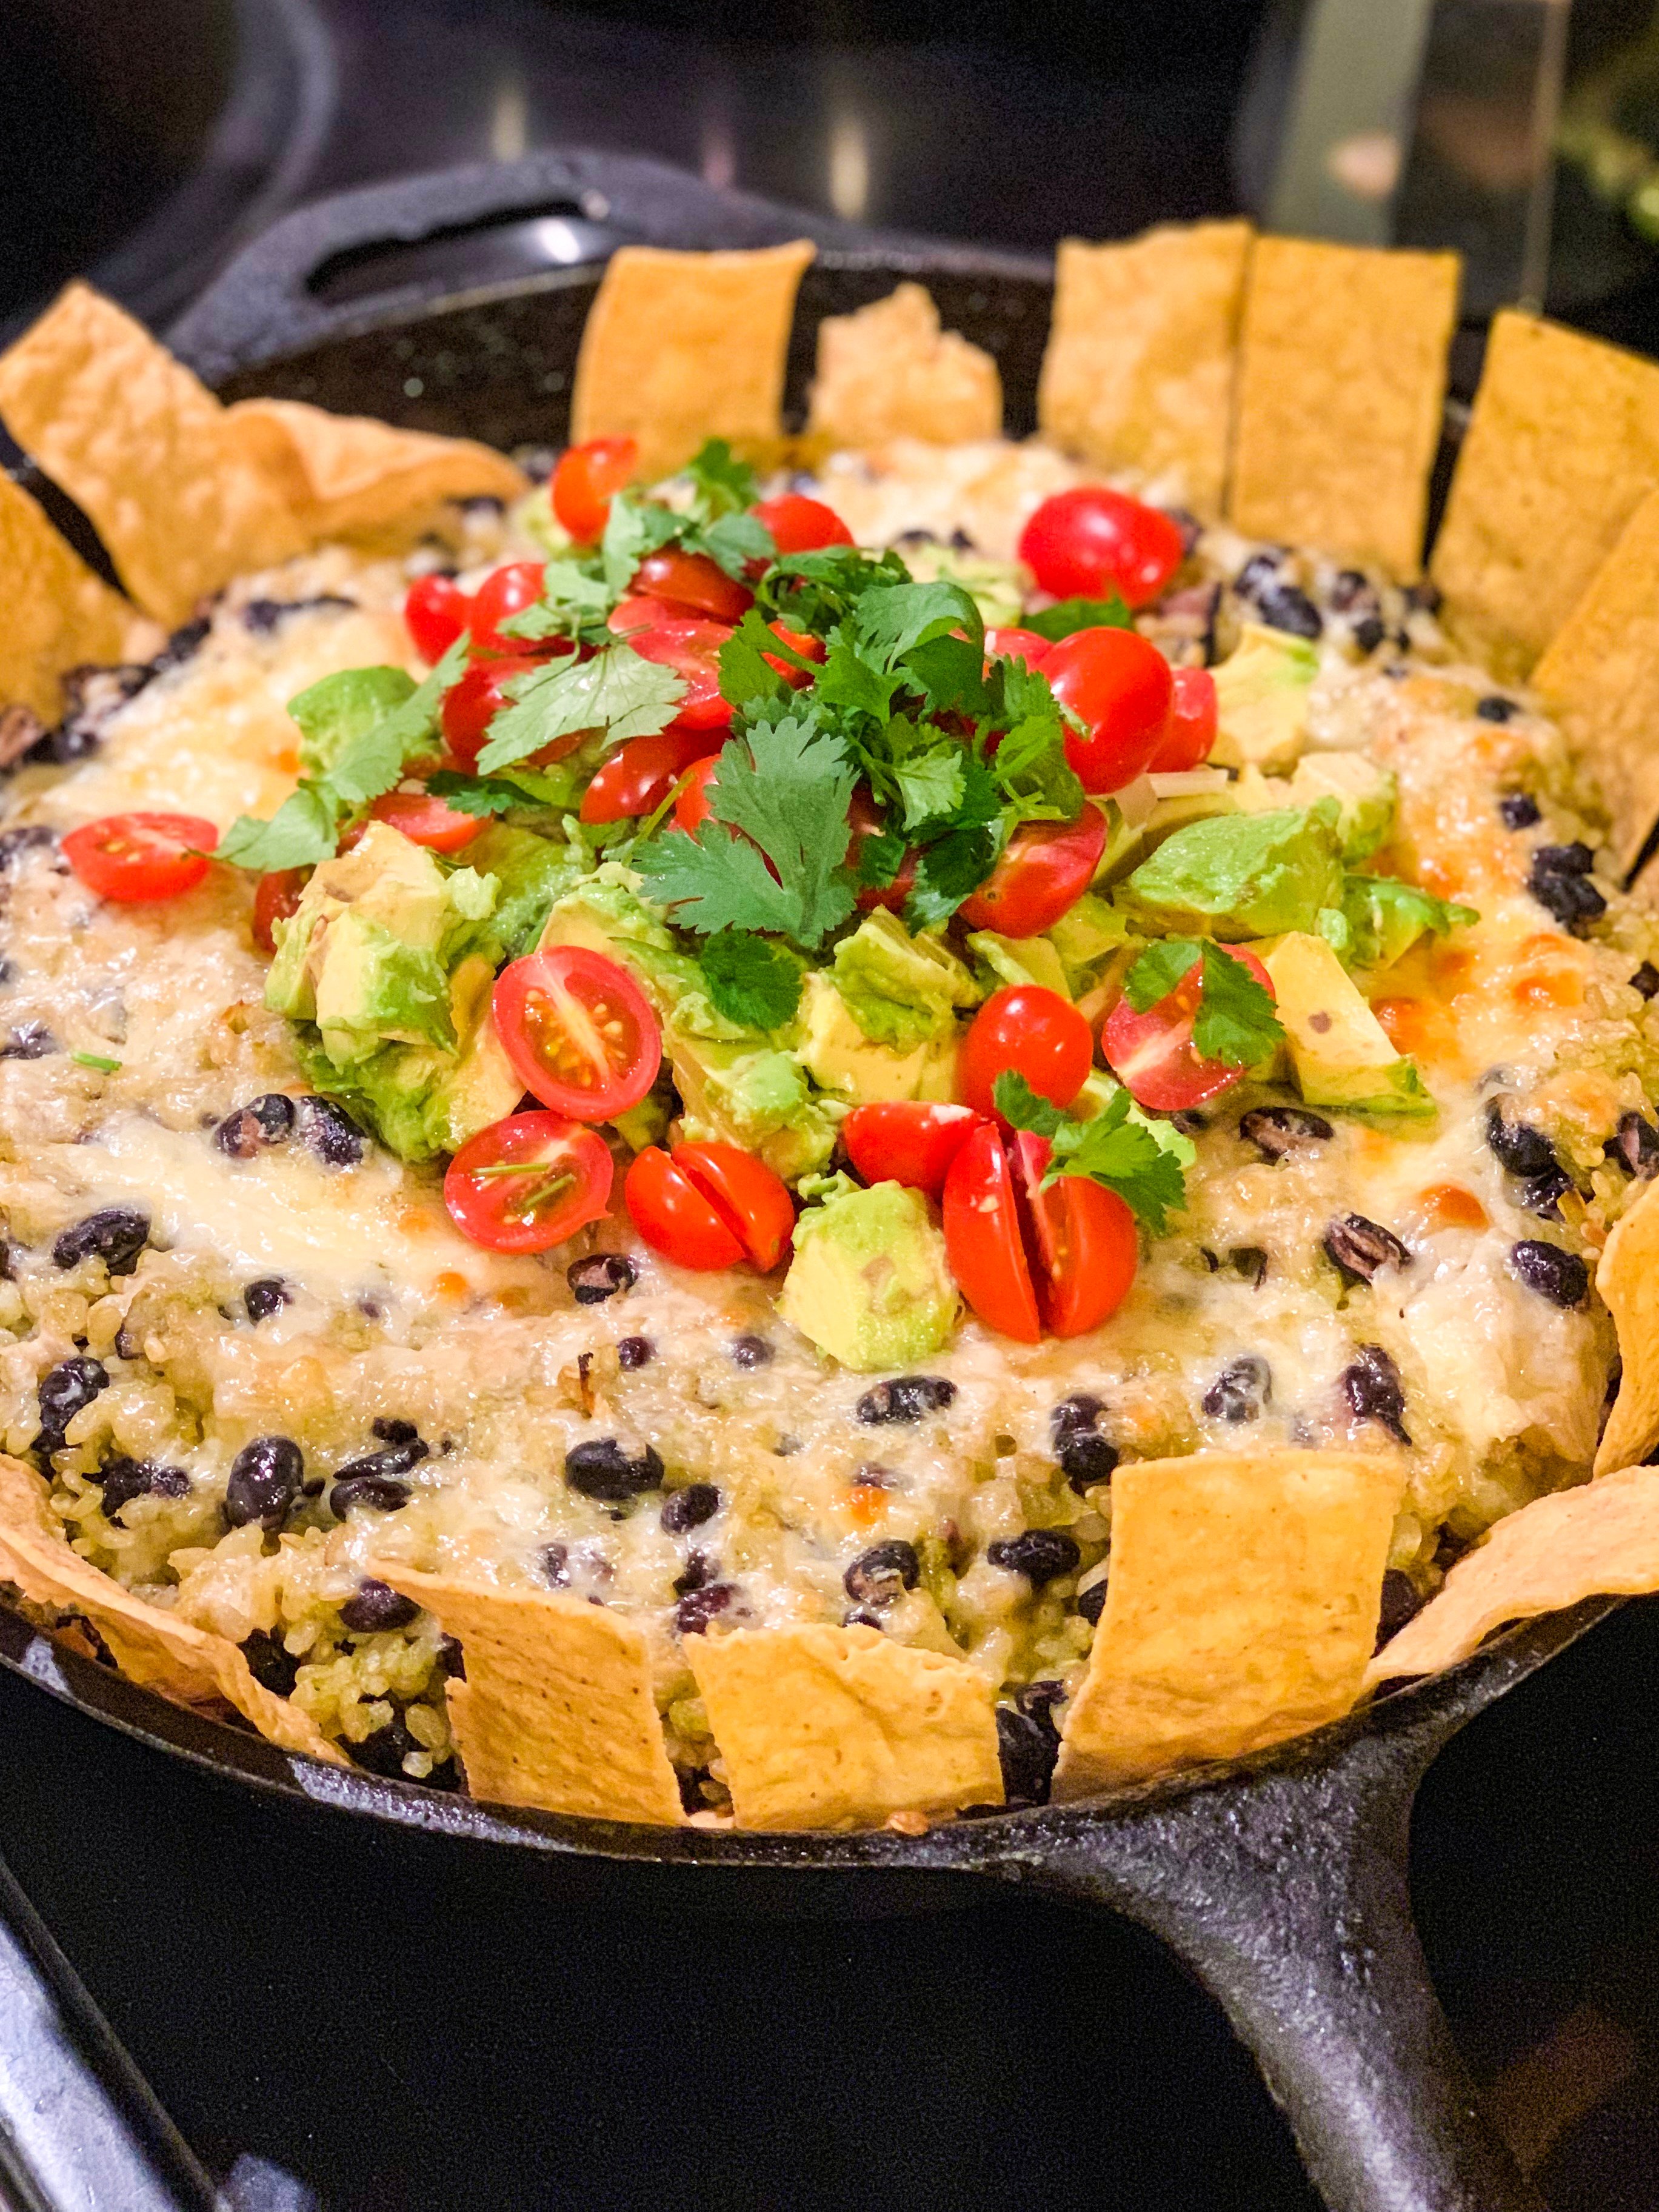 Chipotle Black Beans and Cilantro Rice Bake in a cast iron pan and topped with cheese, tomatoes, and avocados